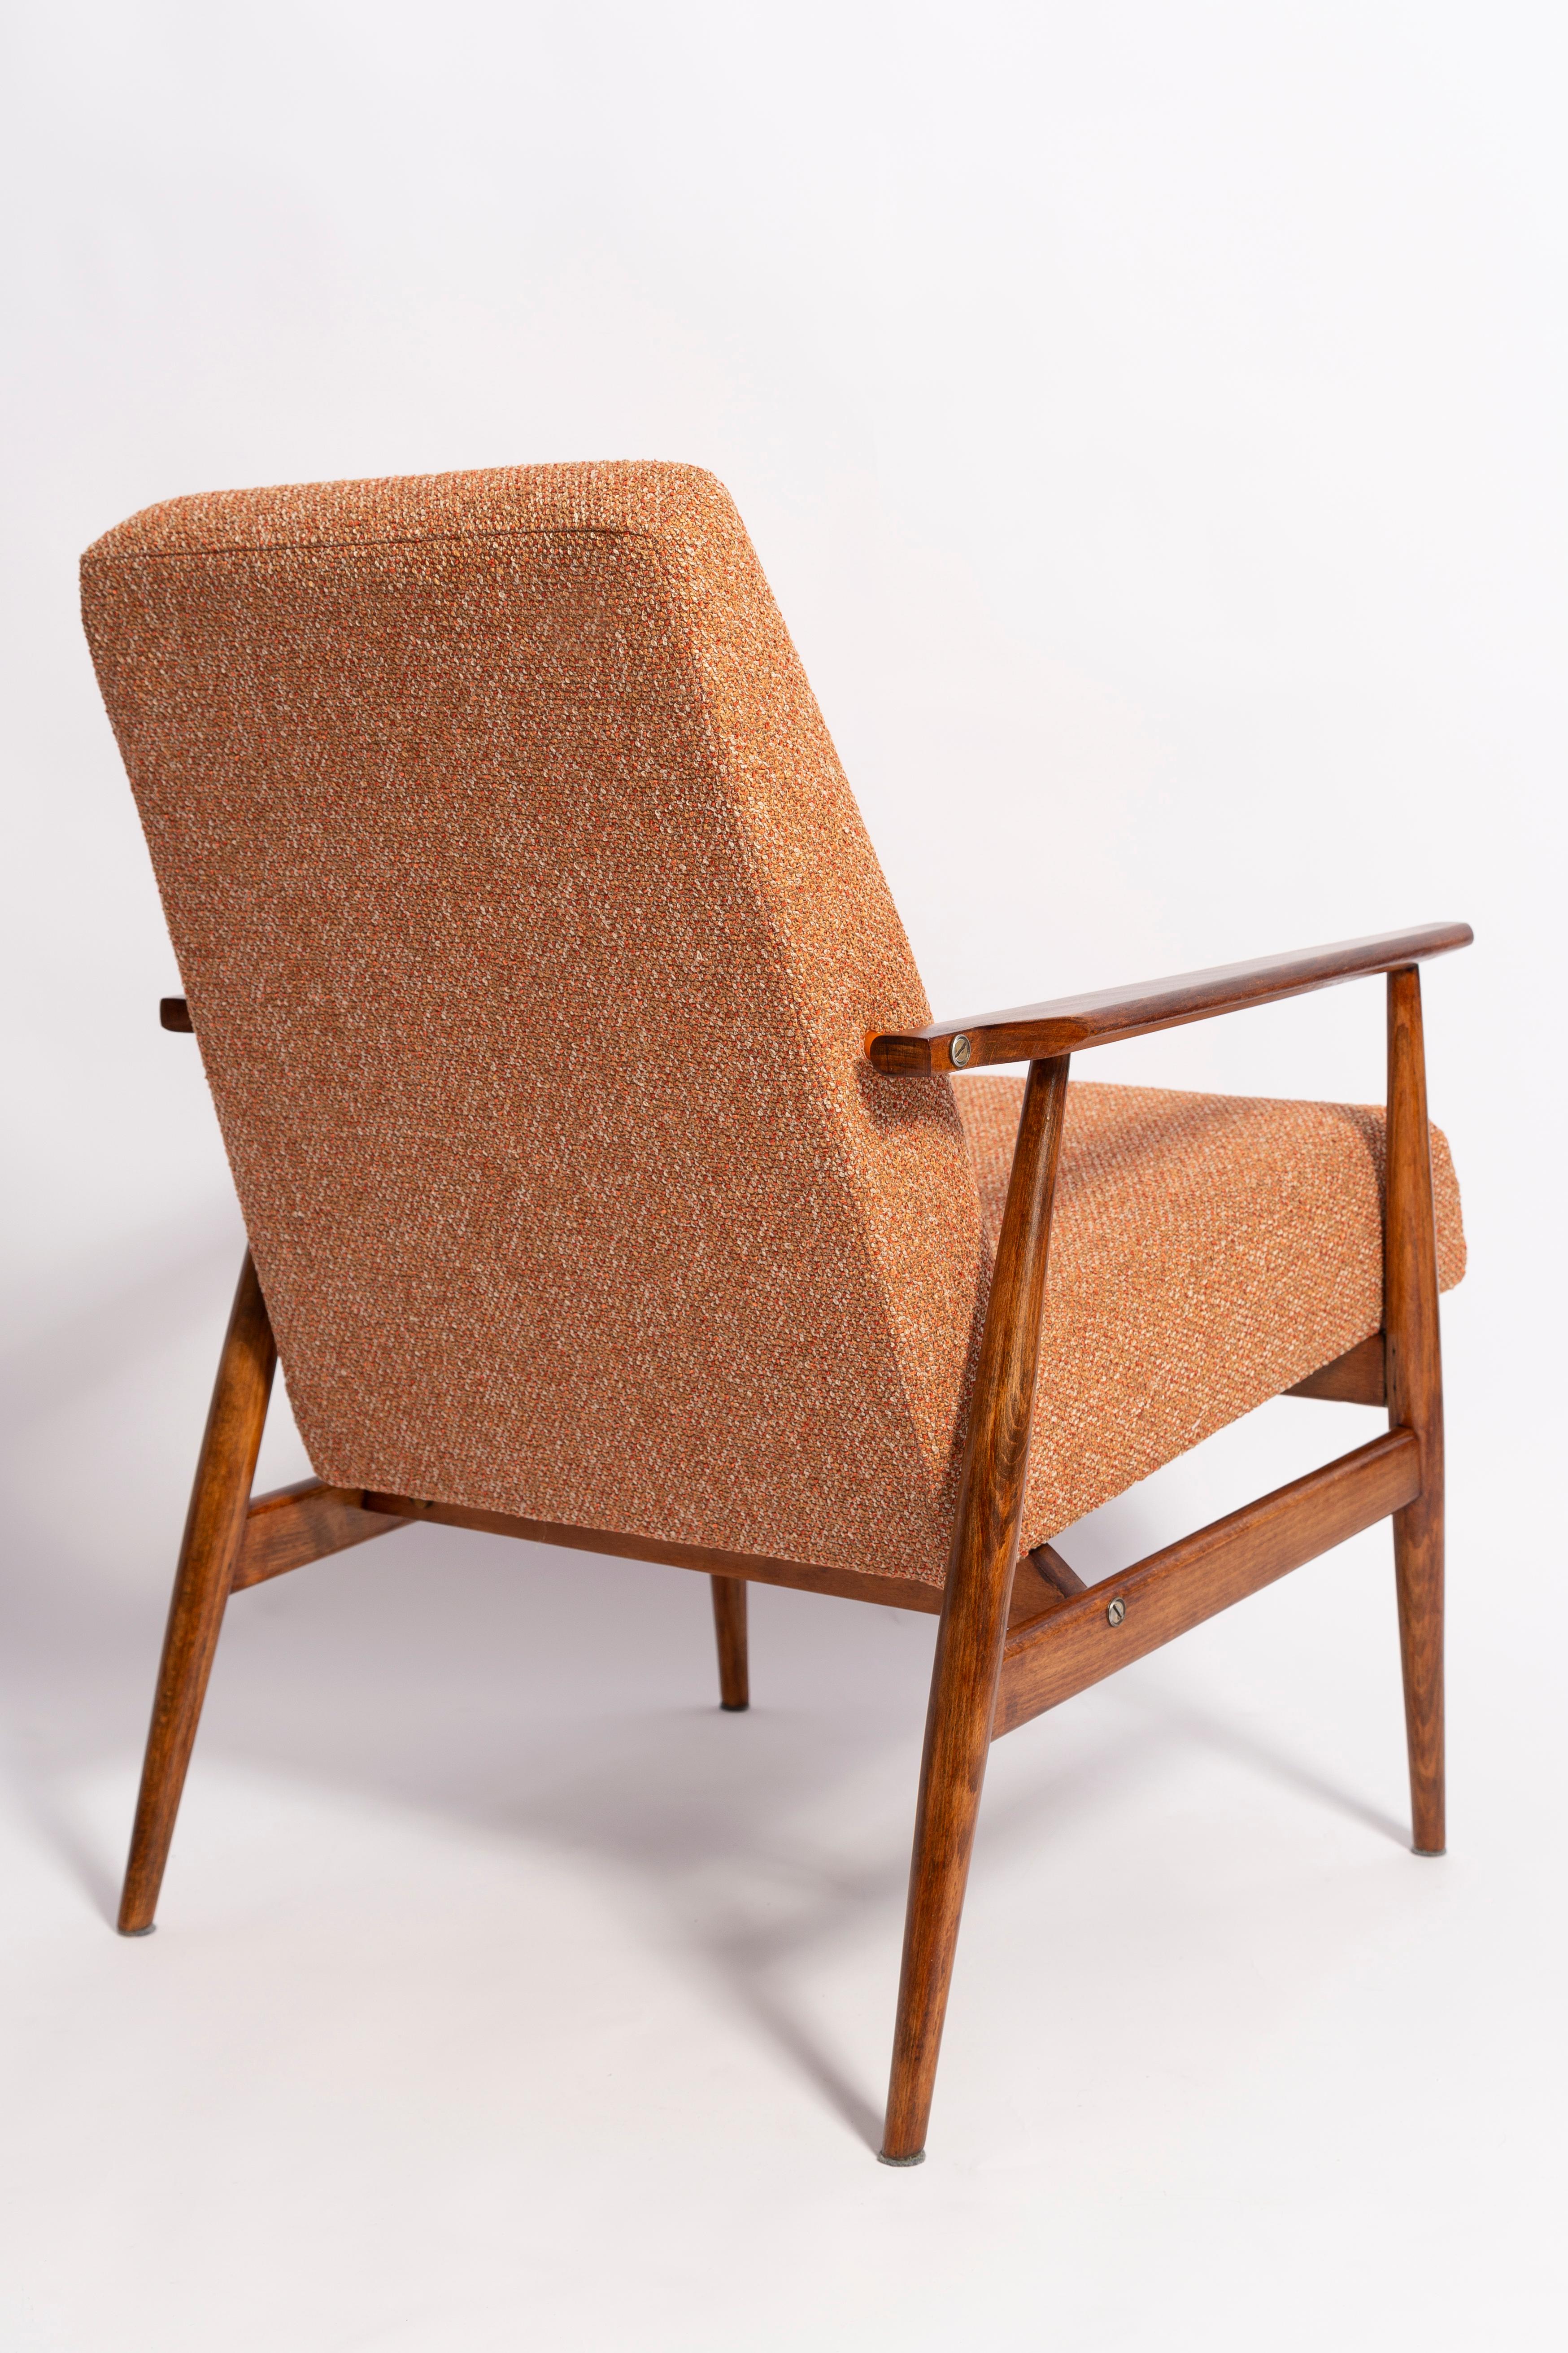 Set of Two Mid-Century Melange Dante Armchairs, H. Lis, 1960s For Sale 3